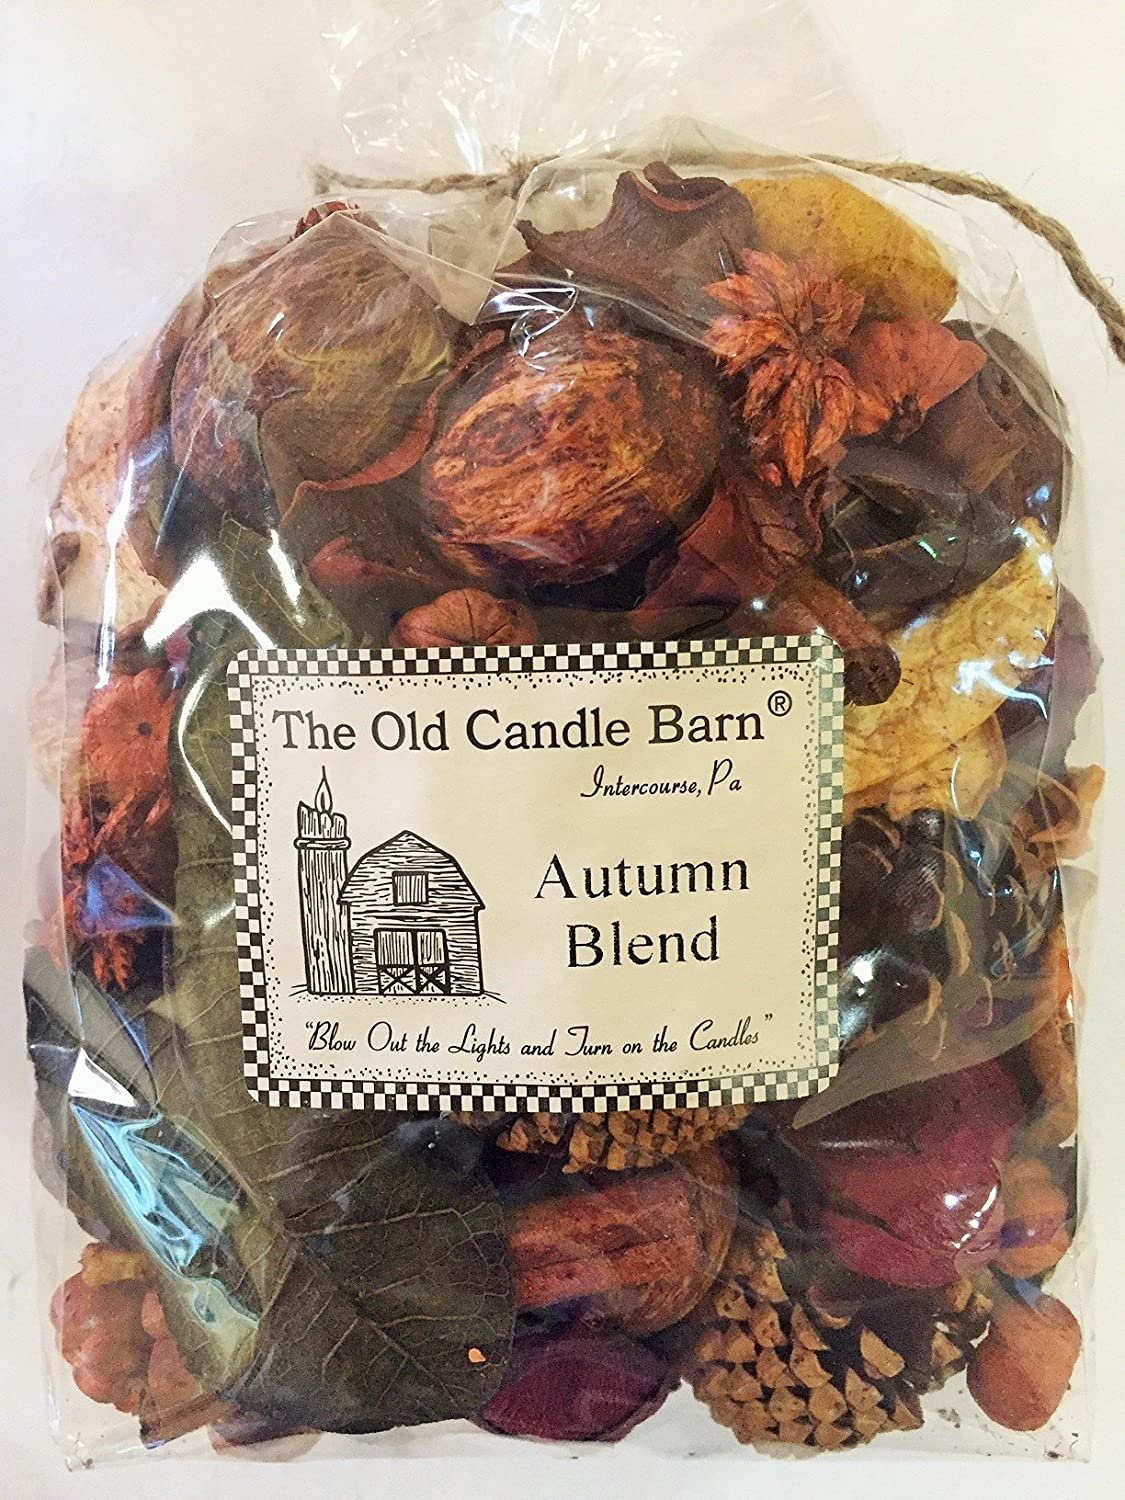 Old Candle Barn Autumn Blend Large 8 Cup Bag - Perfect Fall Decoration or Bowl Filler - Beautiful Autumn Scent